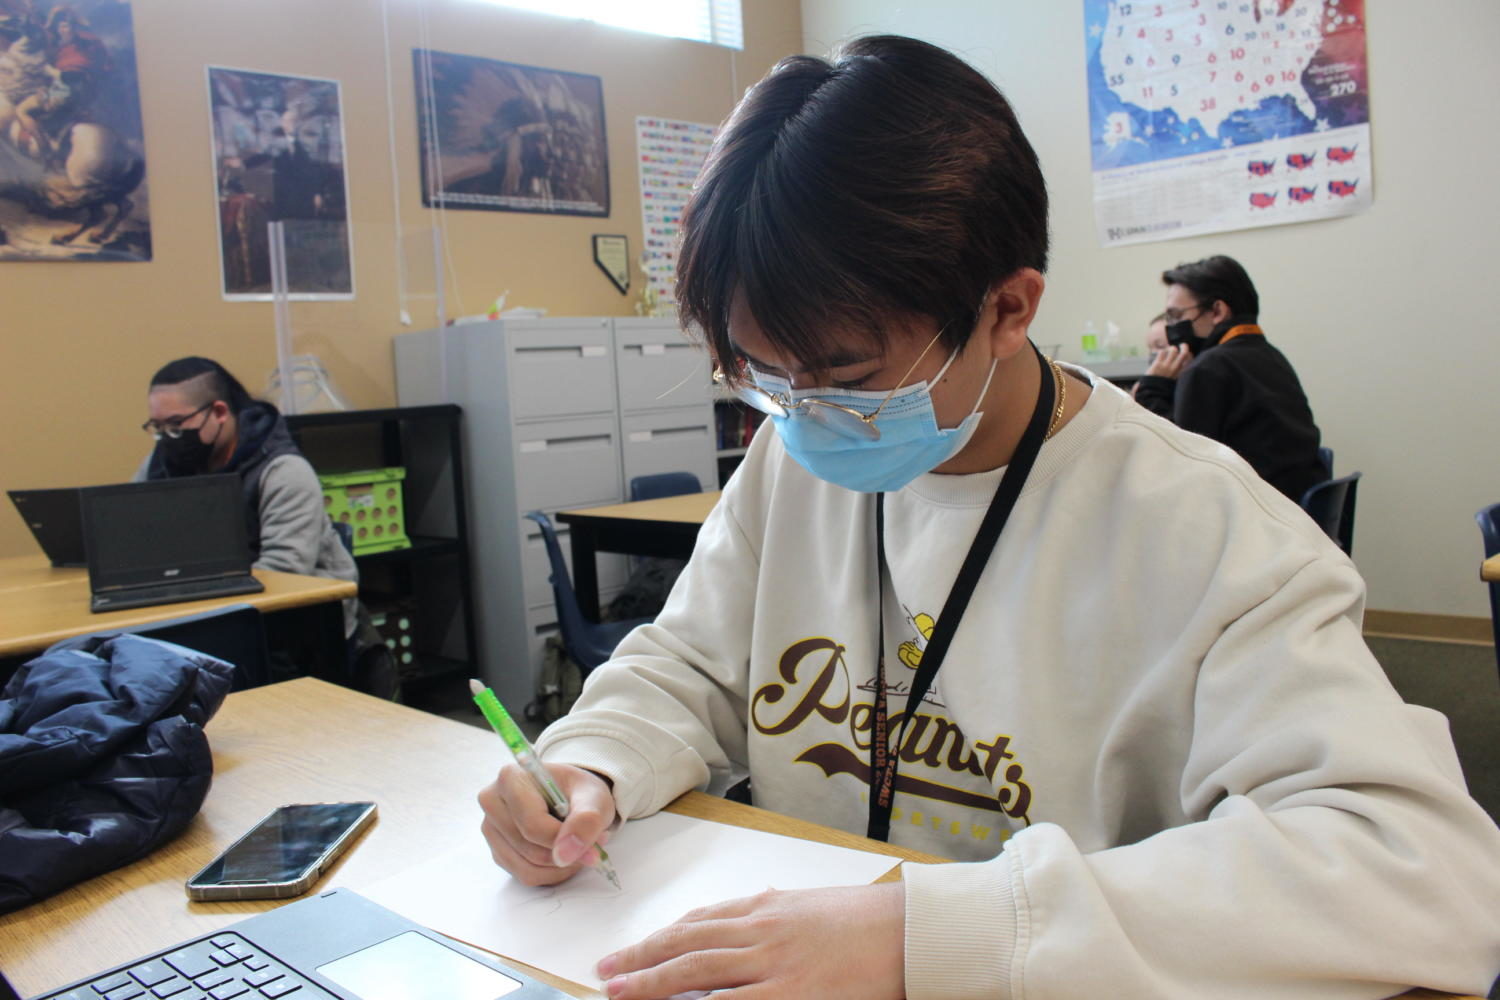 Working on his political cartoon, junior Anthony Pham expresses his ideas and opinions on the War of 1812. Students in APUSH had to create cartoons for their peers to view and interpret. “I’m excited to be able to represent and analyze political cartoons,” junior Anthony Pham said. “Its important to know how to make them since we should know the history and the process behind them.” Photo Credit: Ashley Harris